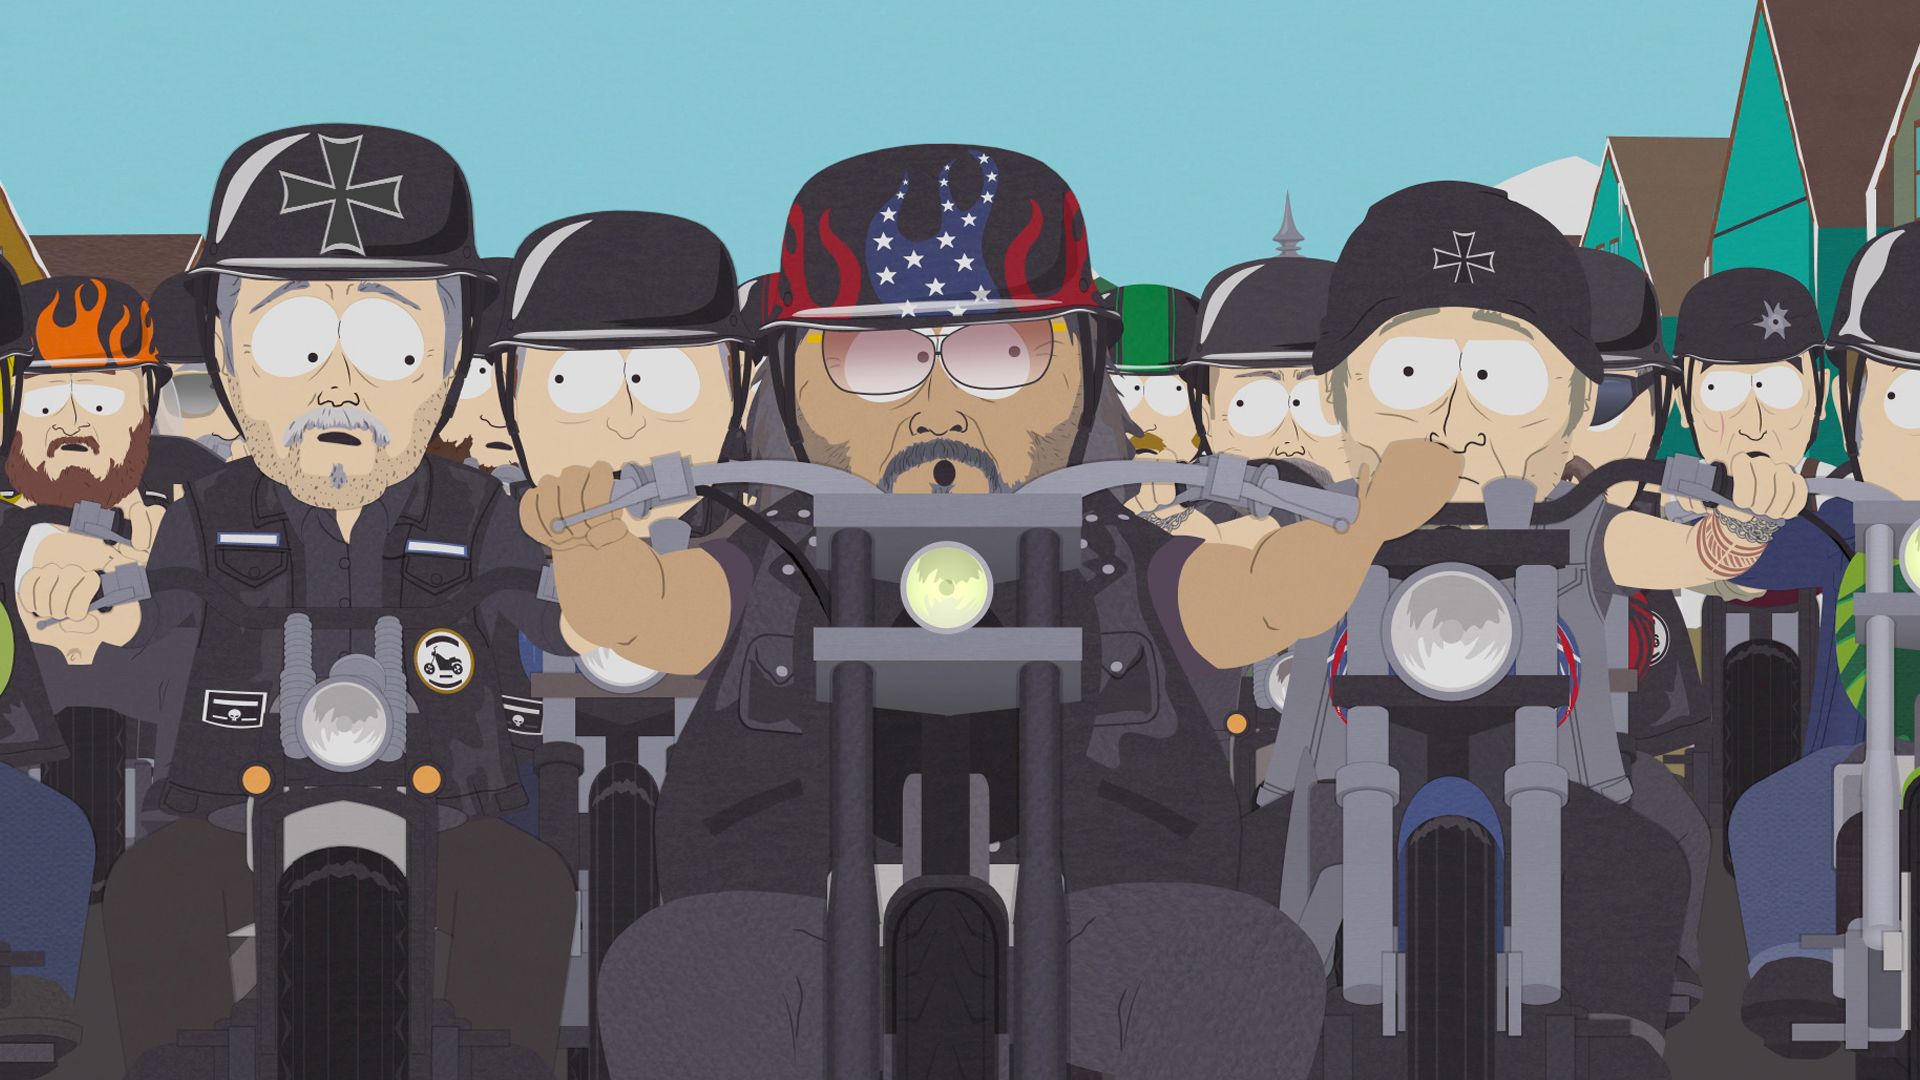 We're Turning Some Heads! - Season 13 Episode 12 - South Park